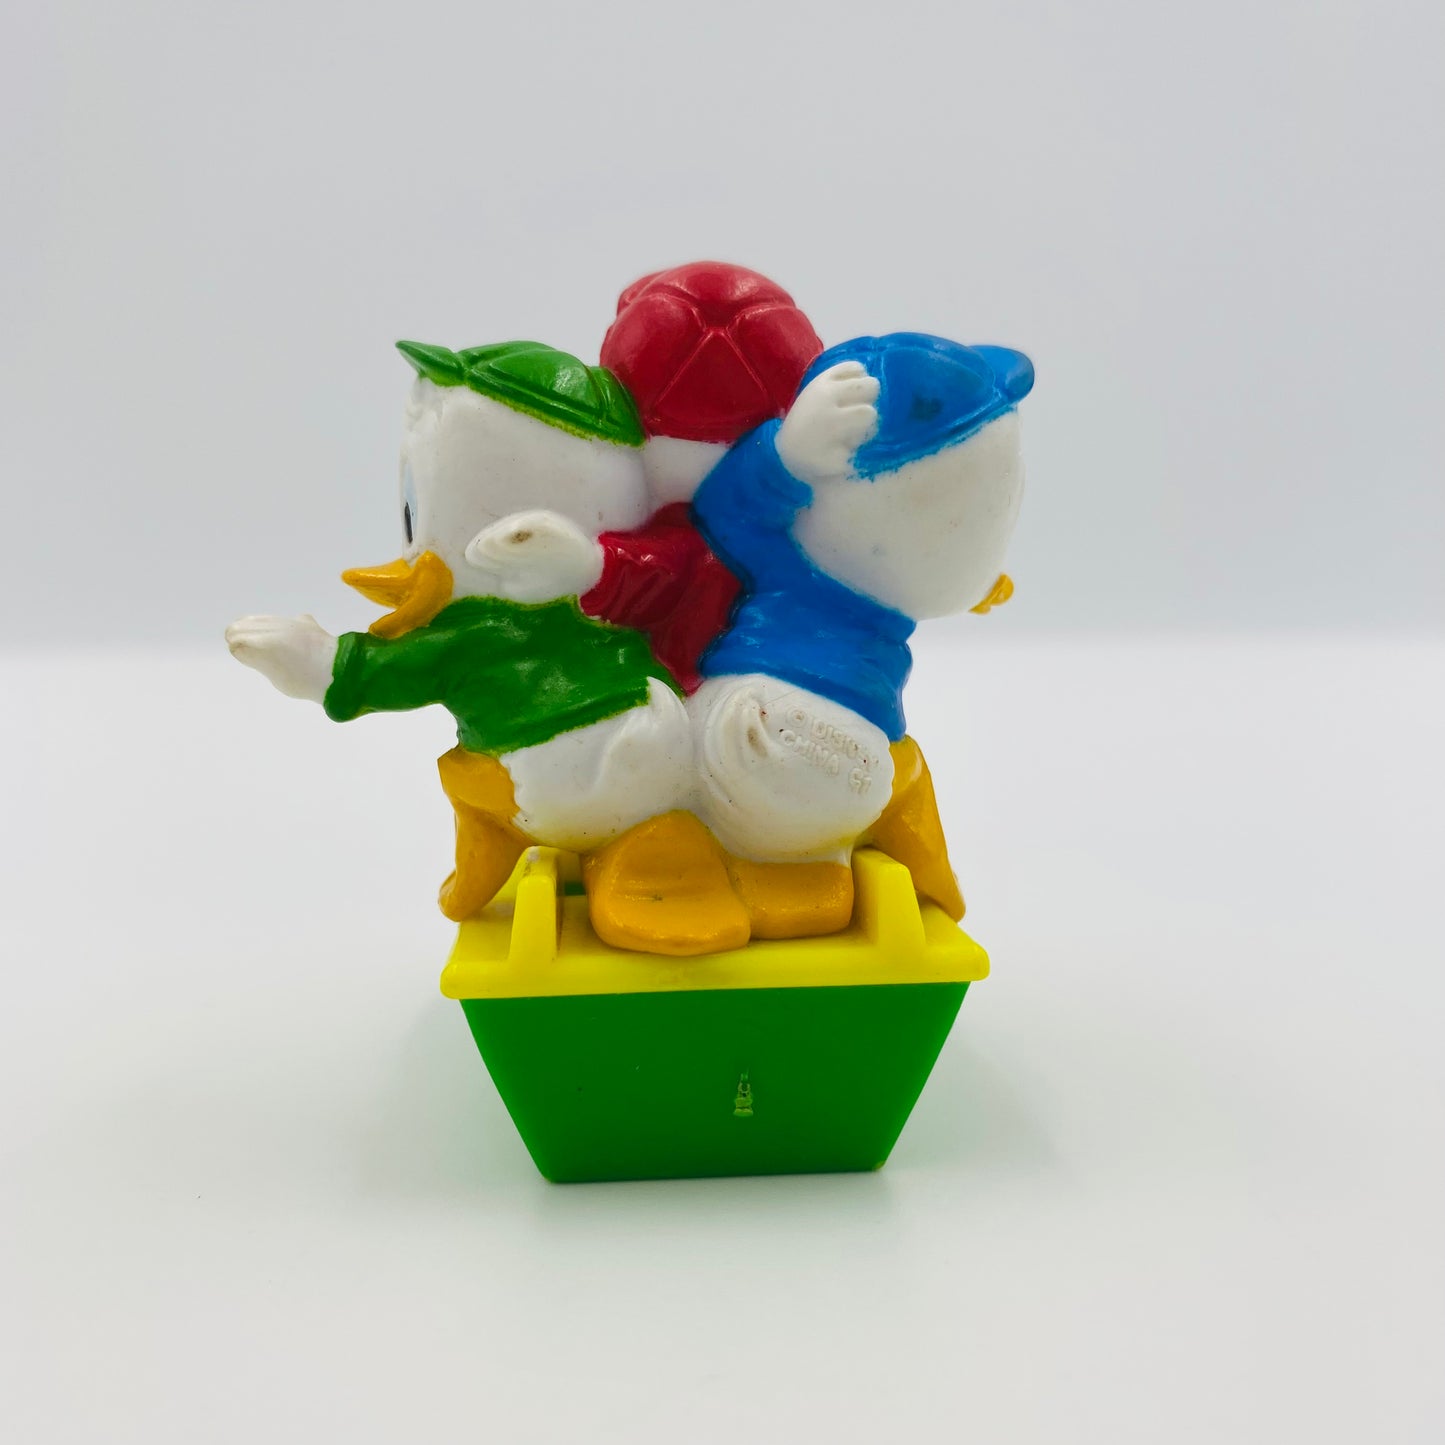 DuckTales Huey Dewey & Louie on Surf Ski (without wheels) McDonald's Happy Meal toy (1988) loose